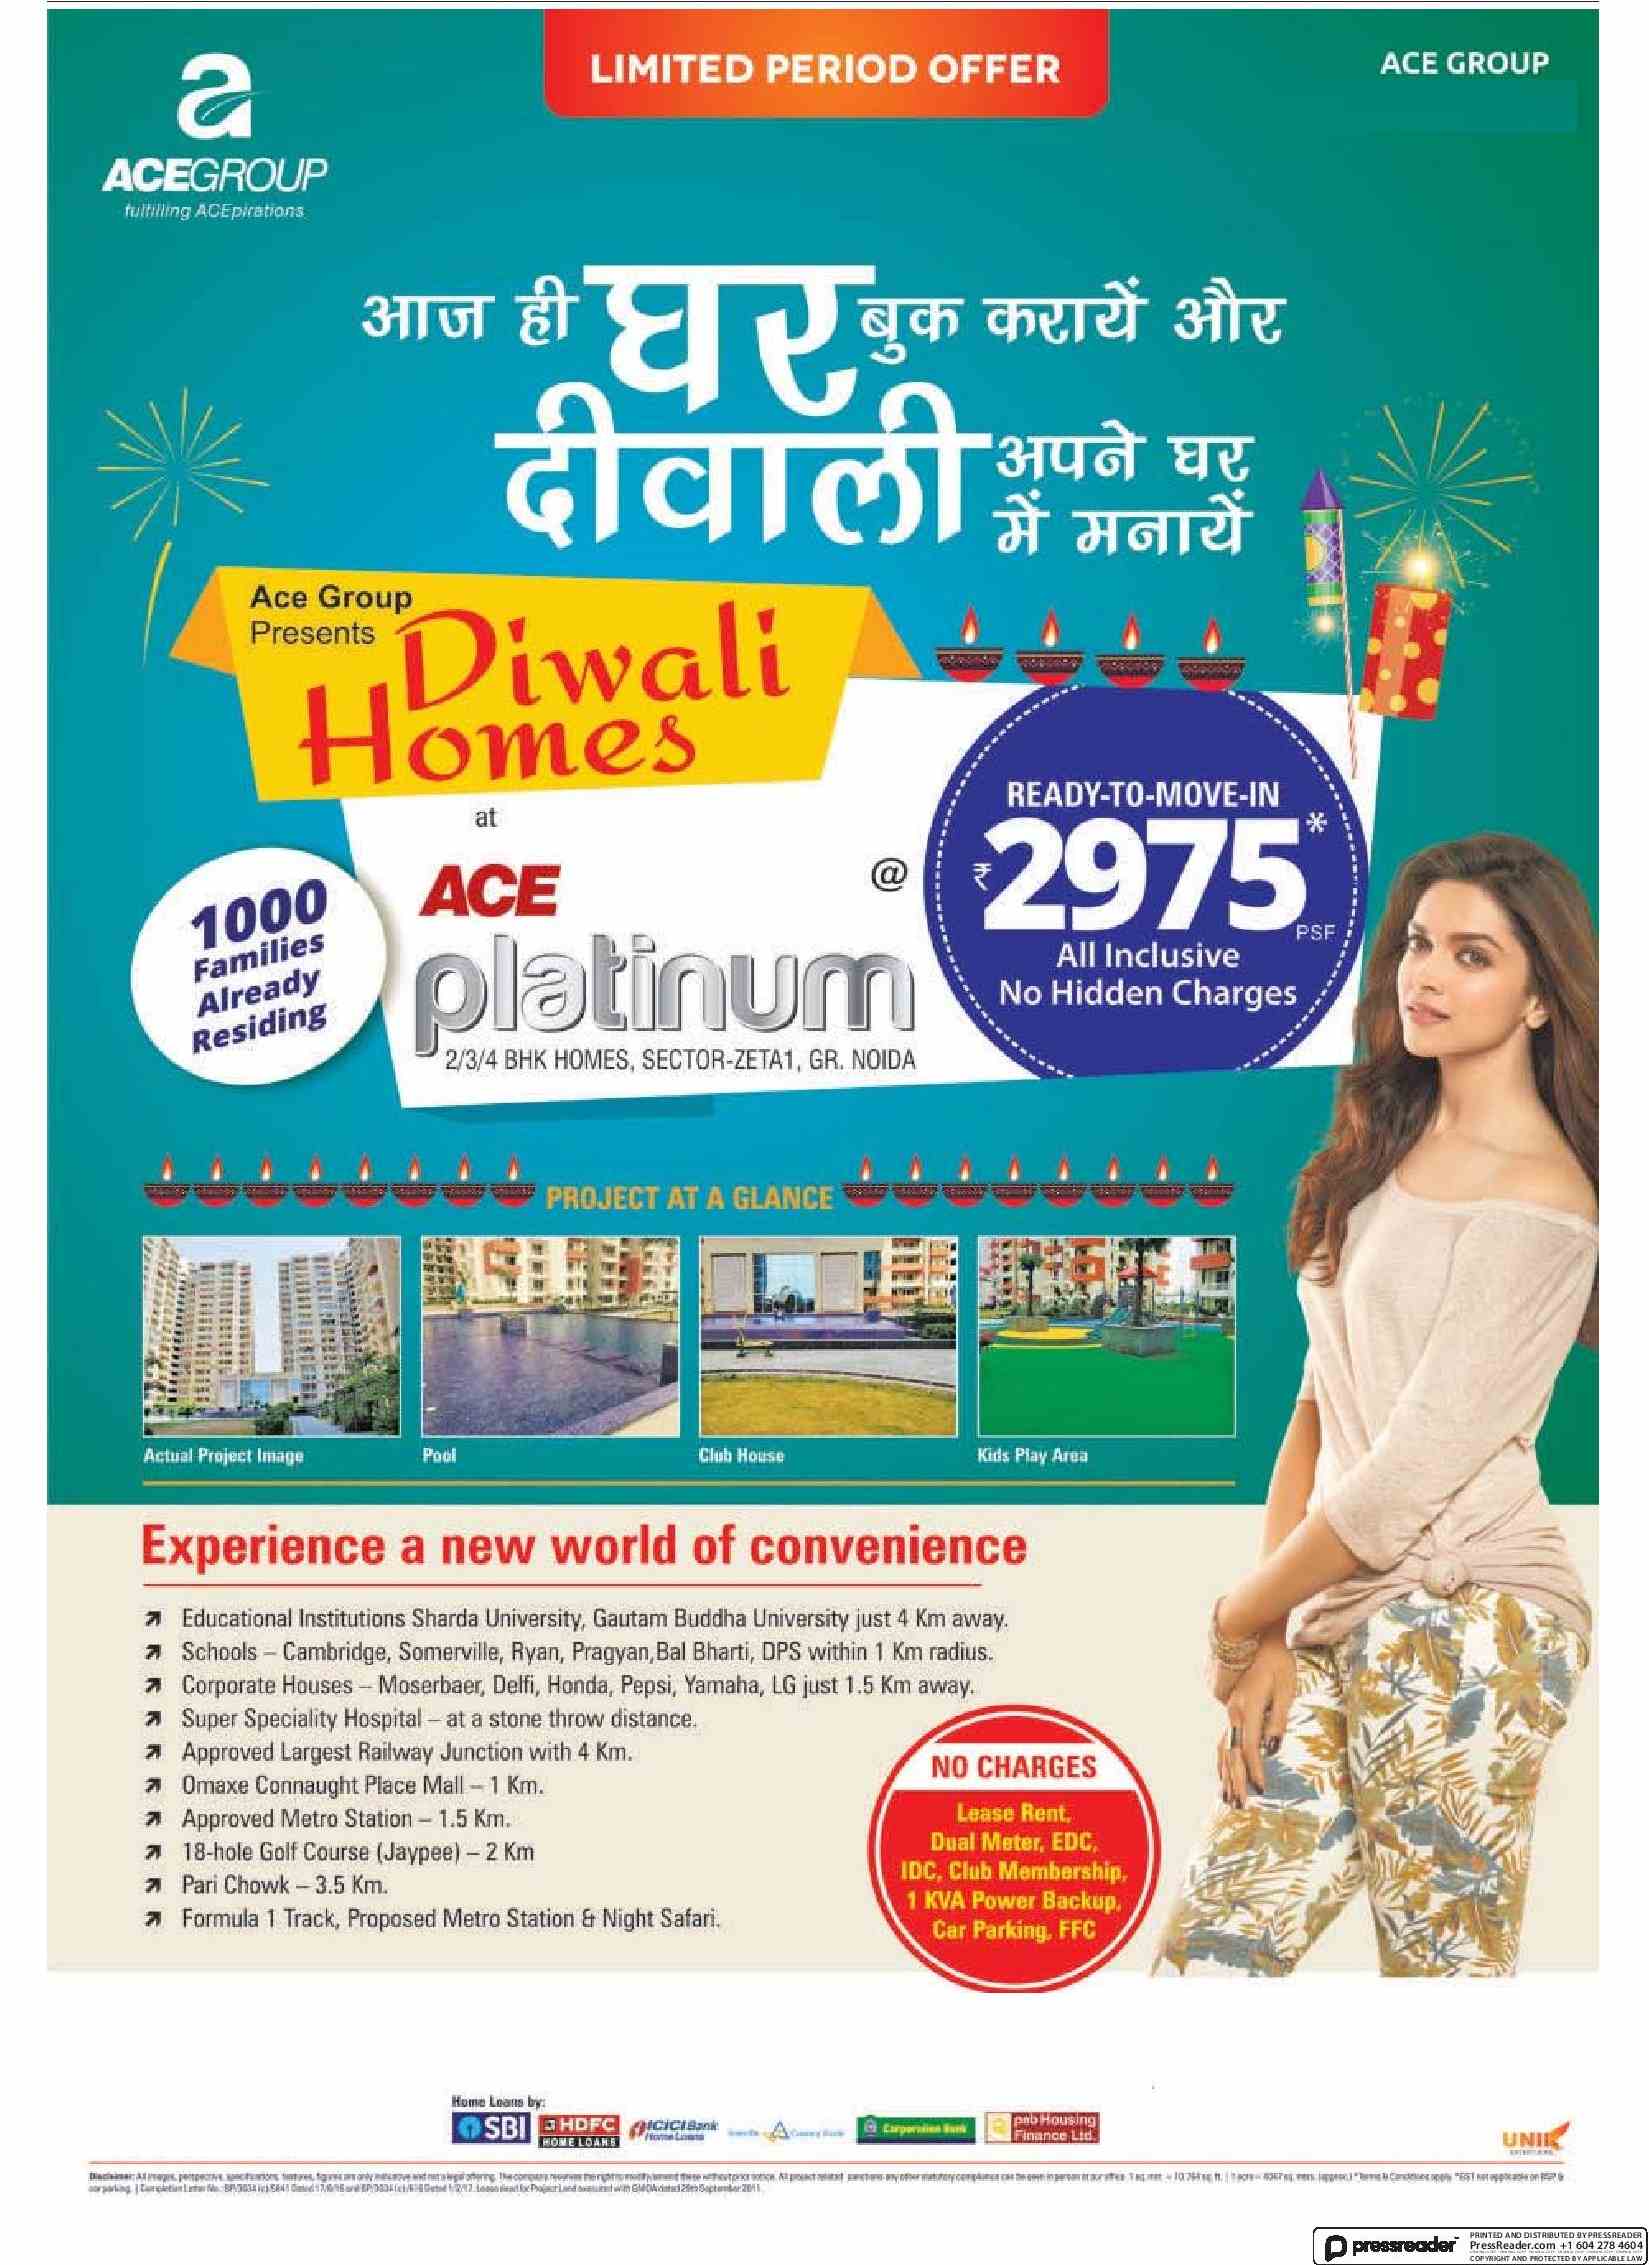 Book ready to move-in homes at Rs. 2975 per sq.ft. at Ace Platinum in Greater Noida Update